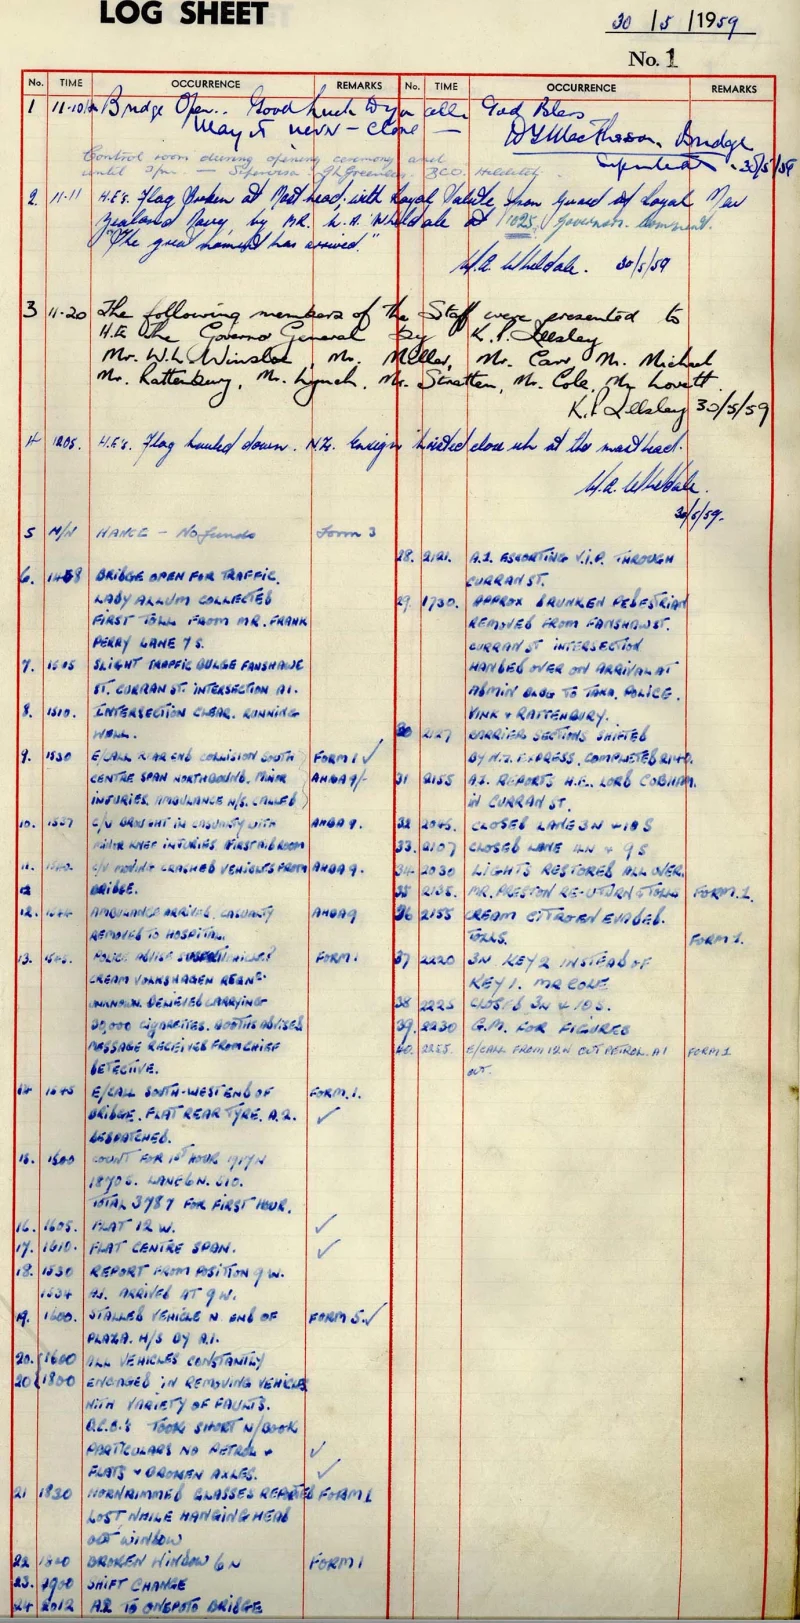 A scanned image showing the daily log of the opening day of the Auckland Harbour Bridge.